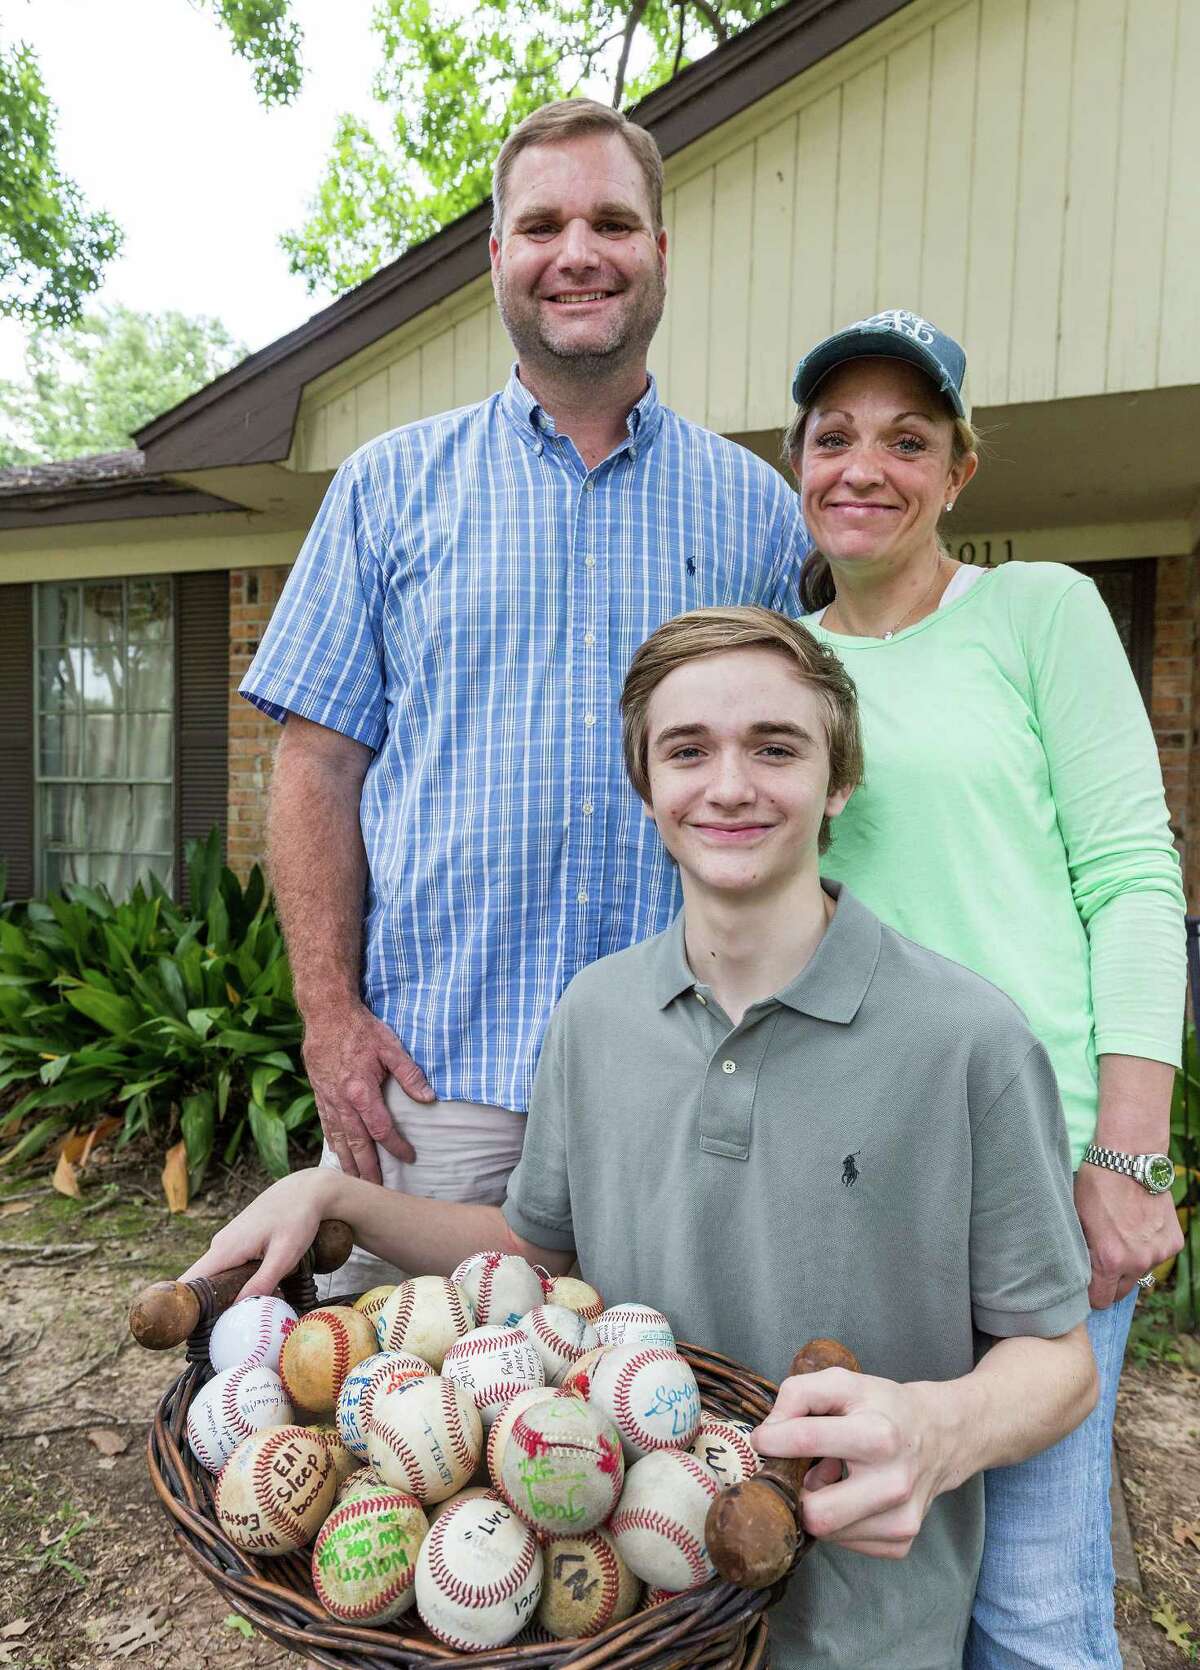 14-year-old (Monday 6-15-15 is his 14th birthday) Walker Johnson was hit in the chest by a baseball in April. His heart stopped but he was revived and he will throw out the first pitch at Monday's Astro's game. Walker is holding and flanked by dozens of signed "get well" baseballs that have been left at his home in west Houston. L-R ID: Dad Carey Johnson; Walker Johnson, 14; mom Christy Johnson. Sunday June 14, 2015